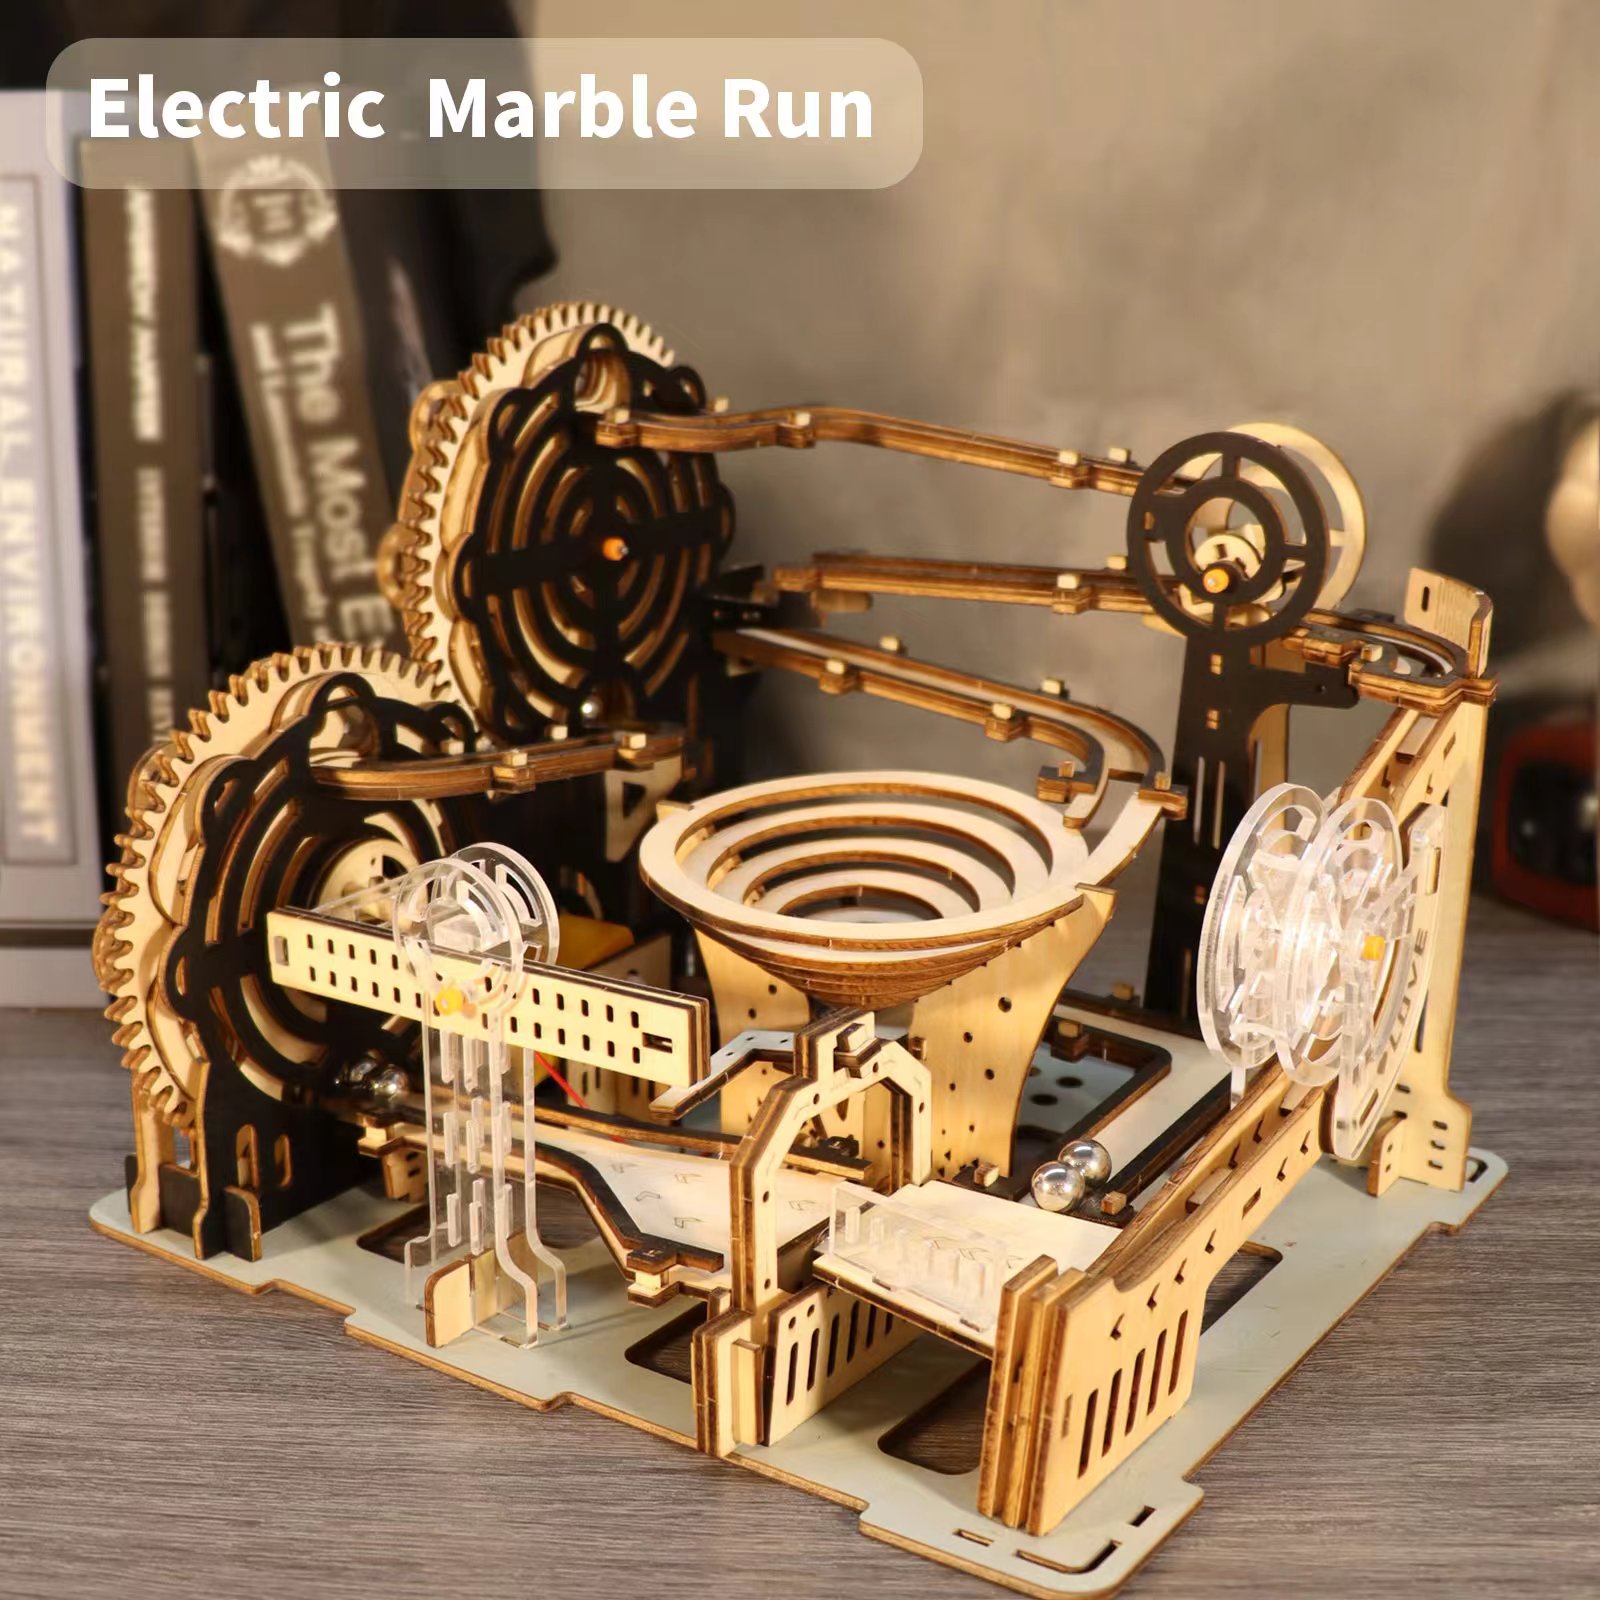 

Electric 3d Wooden Puzzles Model Kits Brain Teaser Puzzle Diy Handmade Christmas Gift(without Battery)